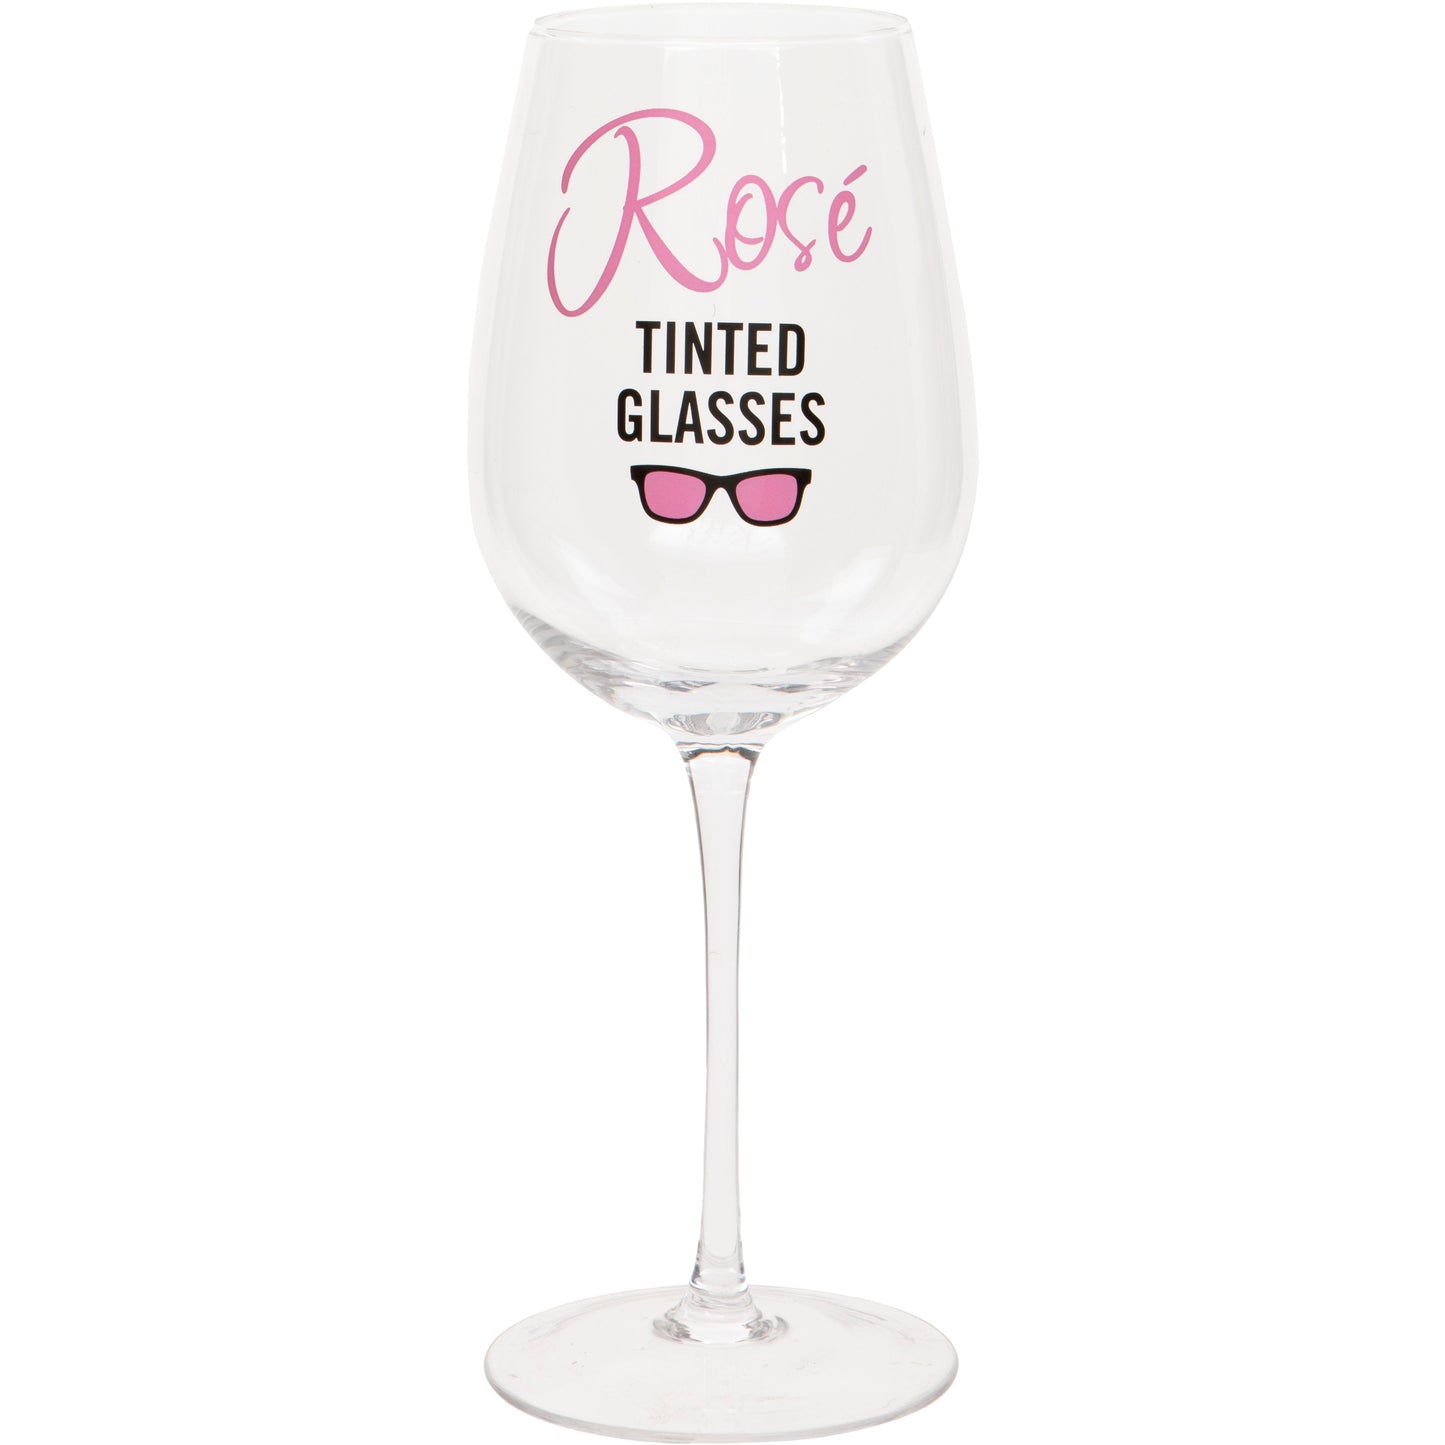 Rose Tinted Glasses Wine Glass